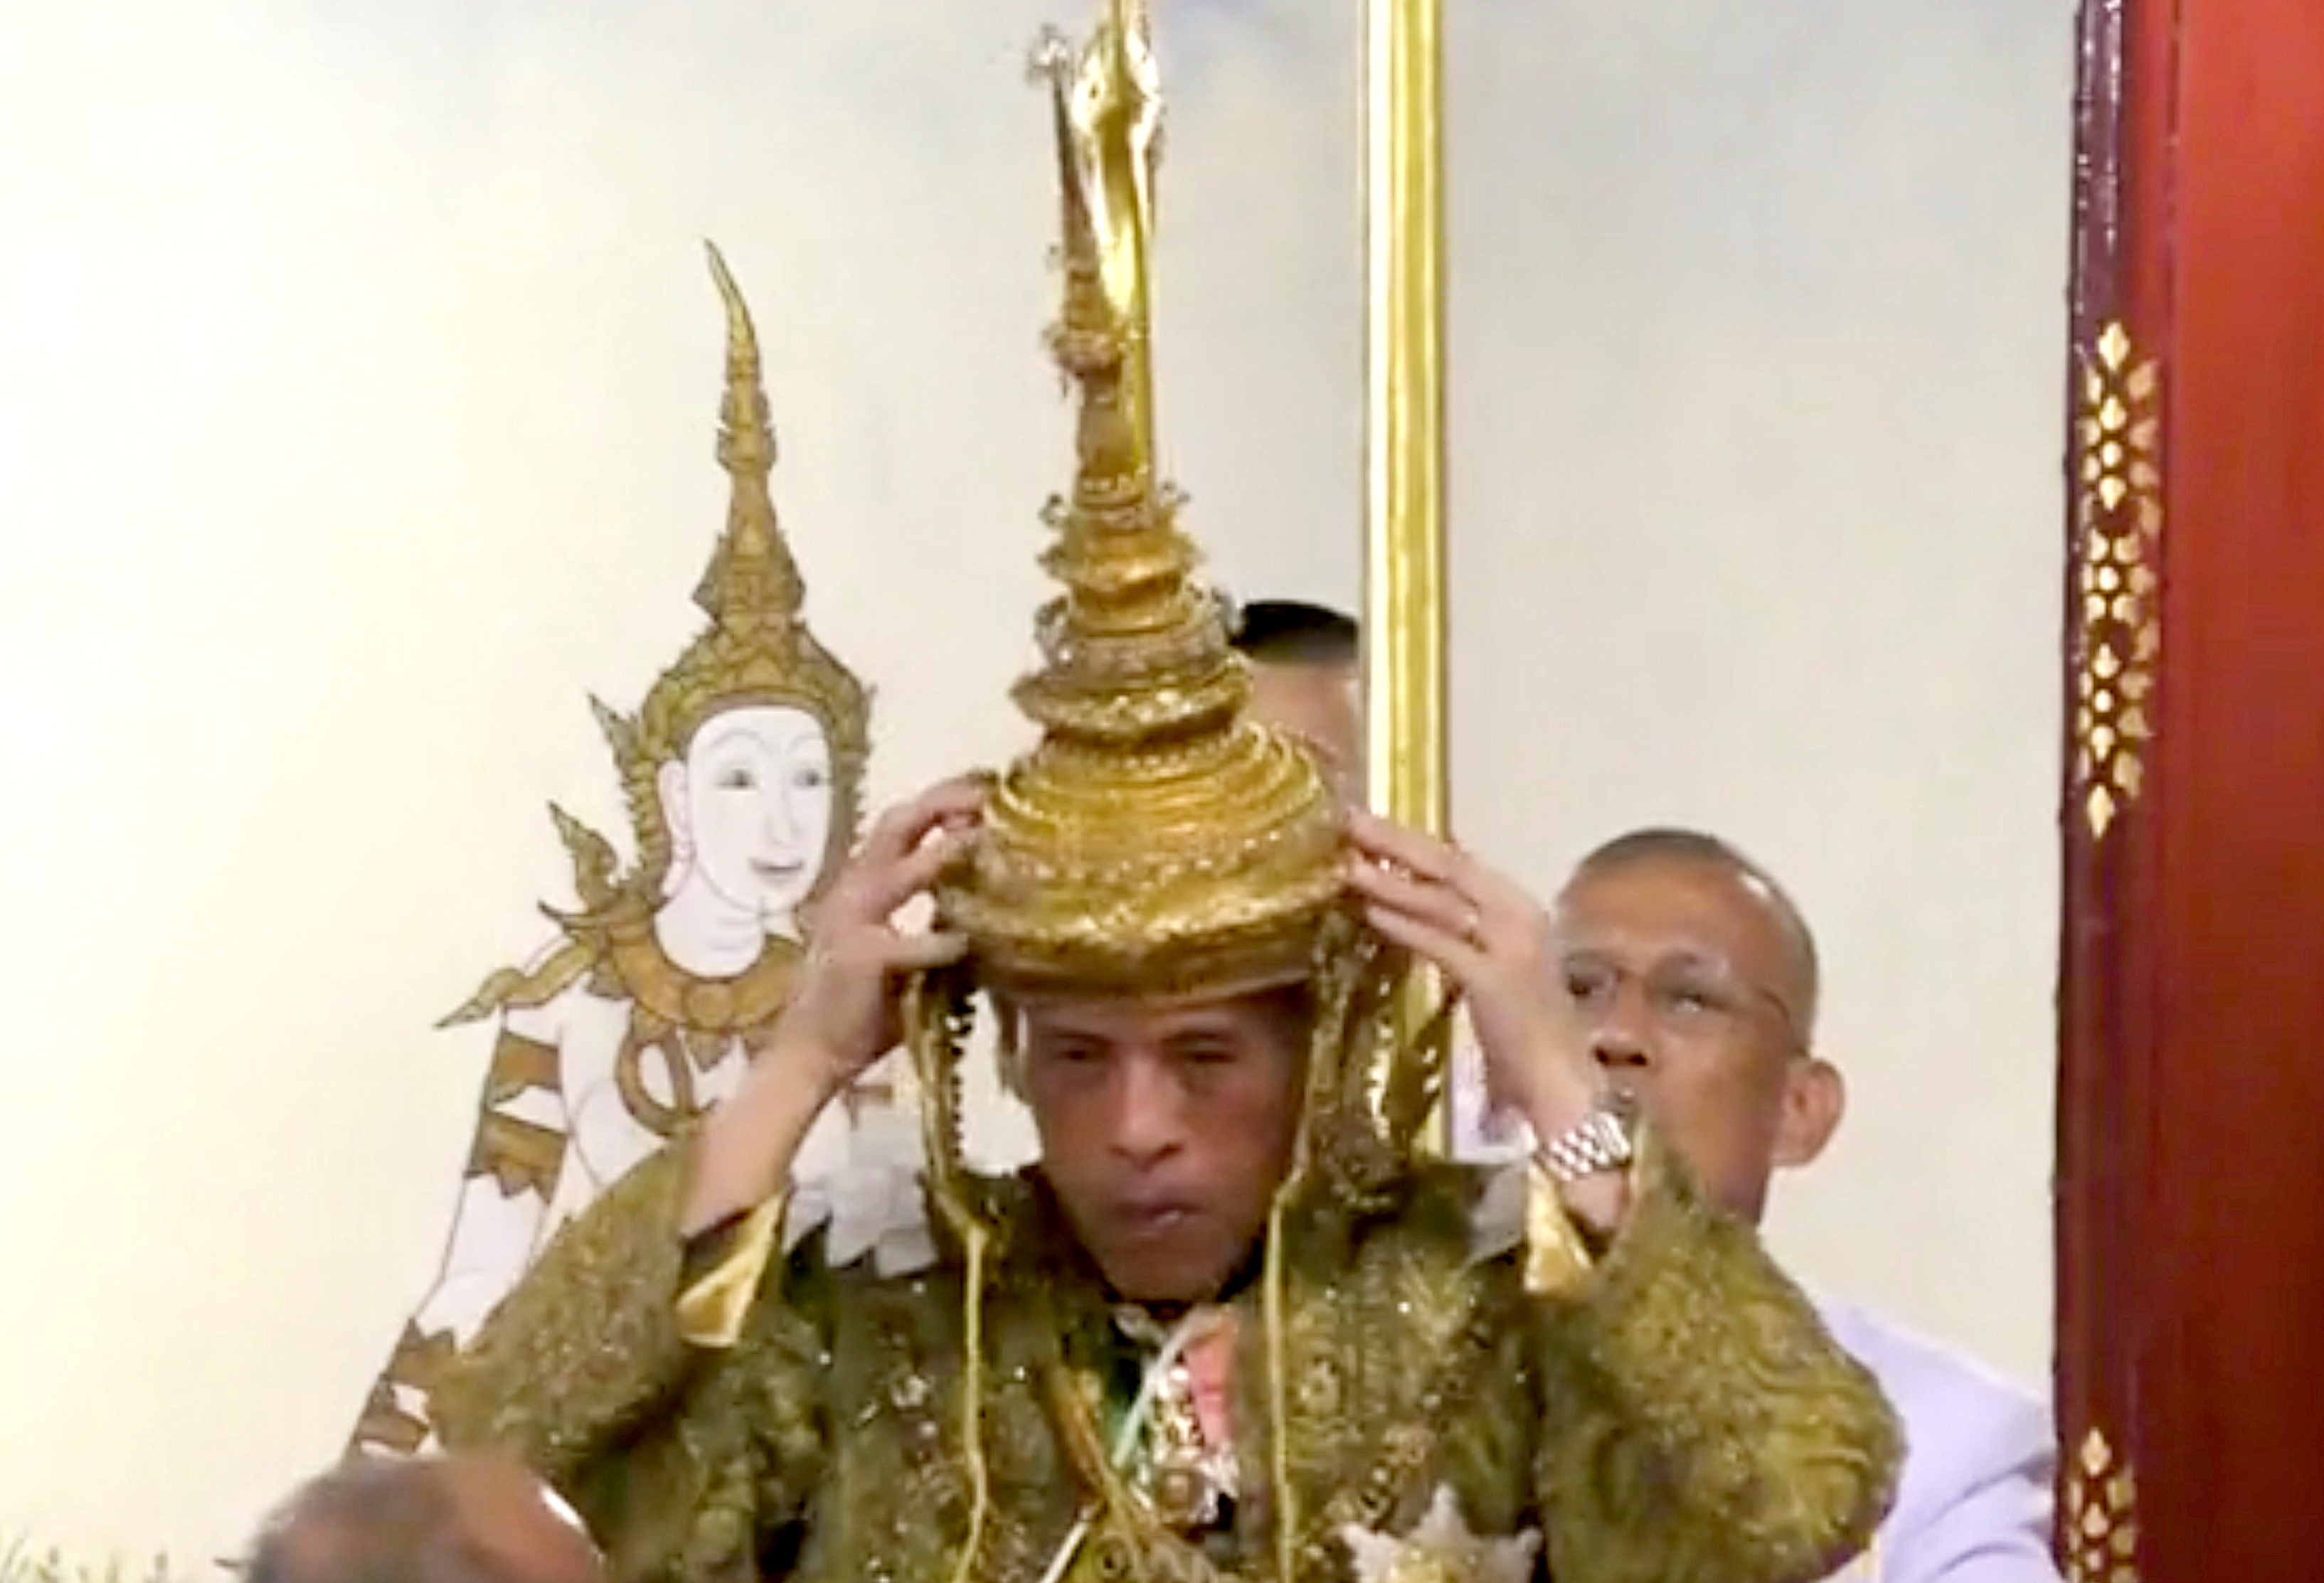 2019-05-04T072632Z_948315276_RC1EE0951570_RTRMADP_3_THAILAND-KING-CORONATION